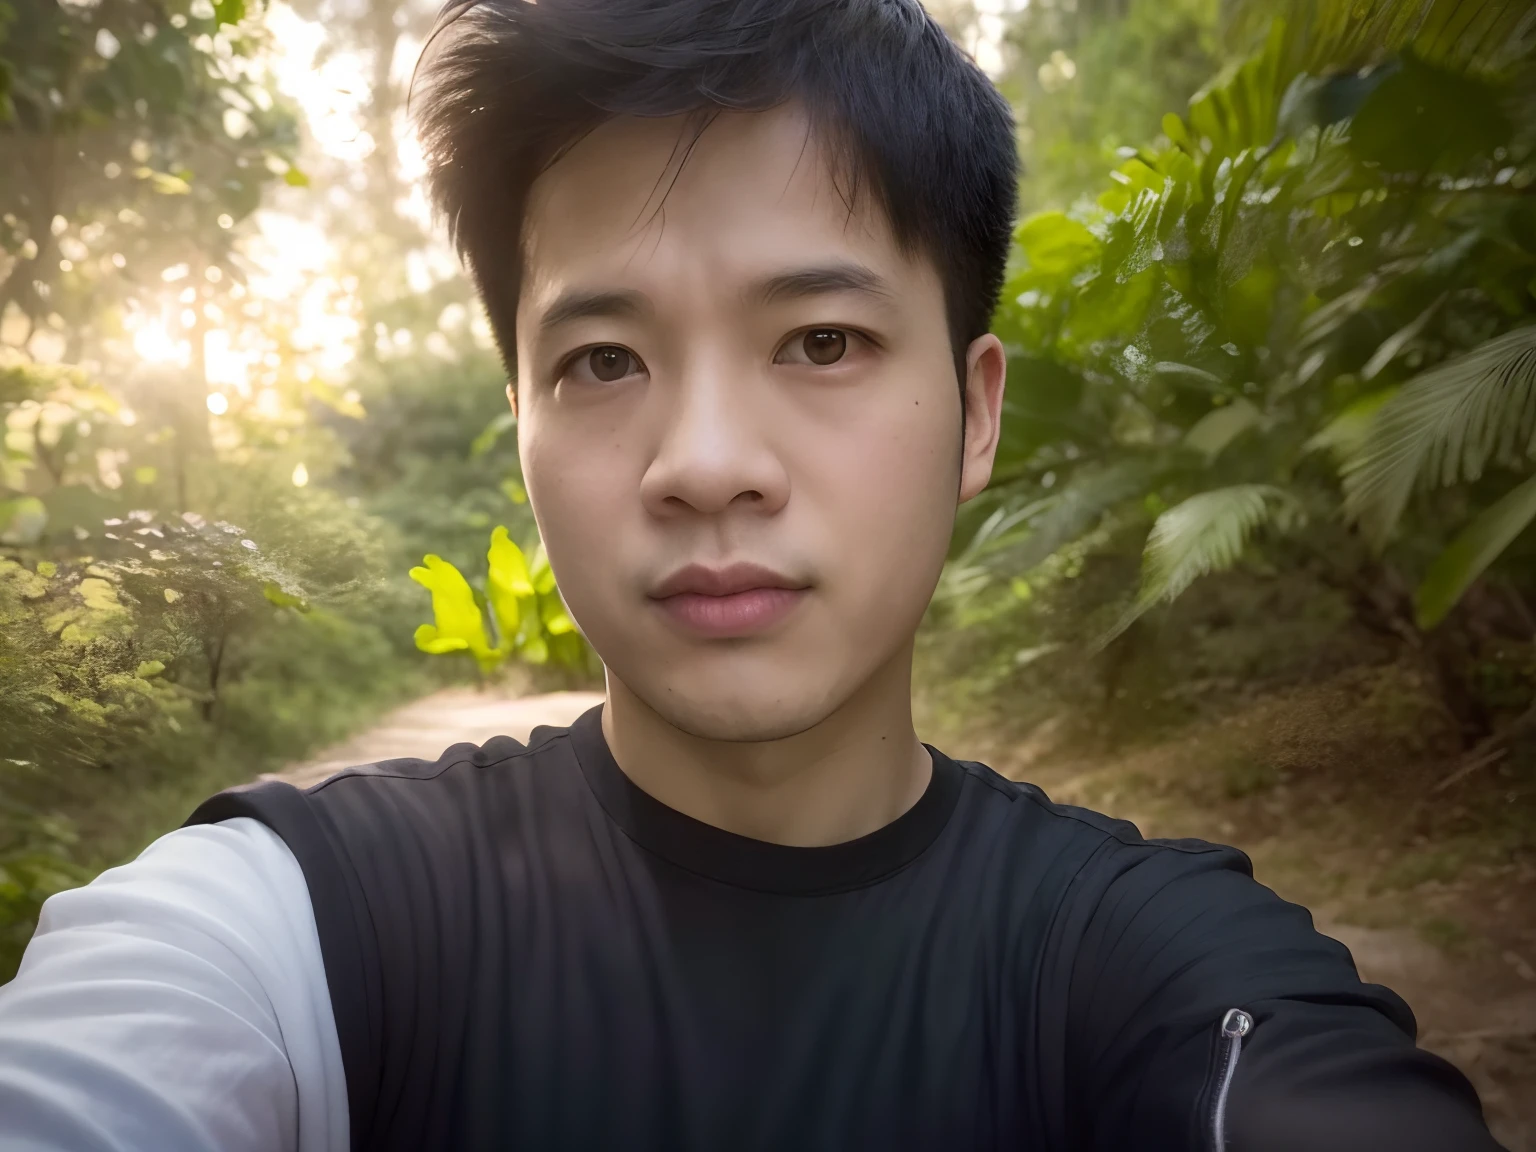 There was a man taking a selfie in the woods, in front of a forest background, xintong chen, 8k selfie photograph, thawan duchanee, damien tran, Selfie Photos, in jungle, at a forest, kakar cheung, ren heng, in jungle forest !!!, Leng Jun, steve zheng, kevin hou